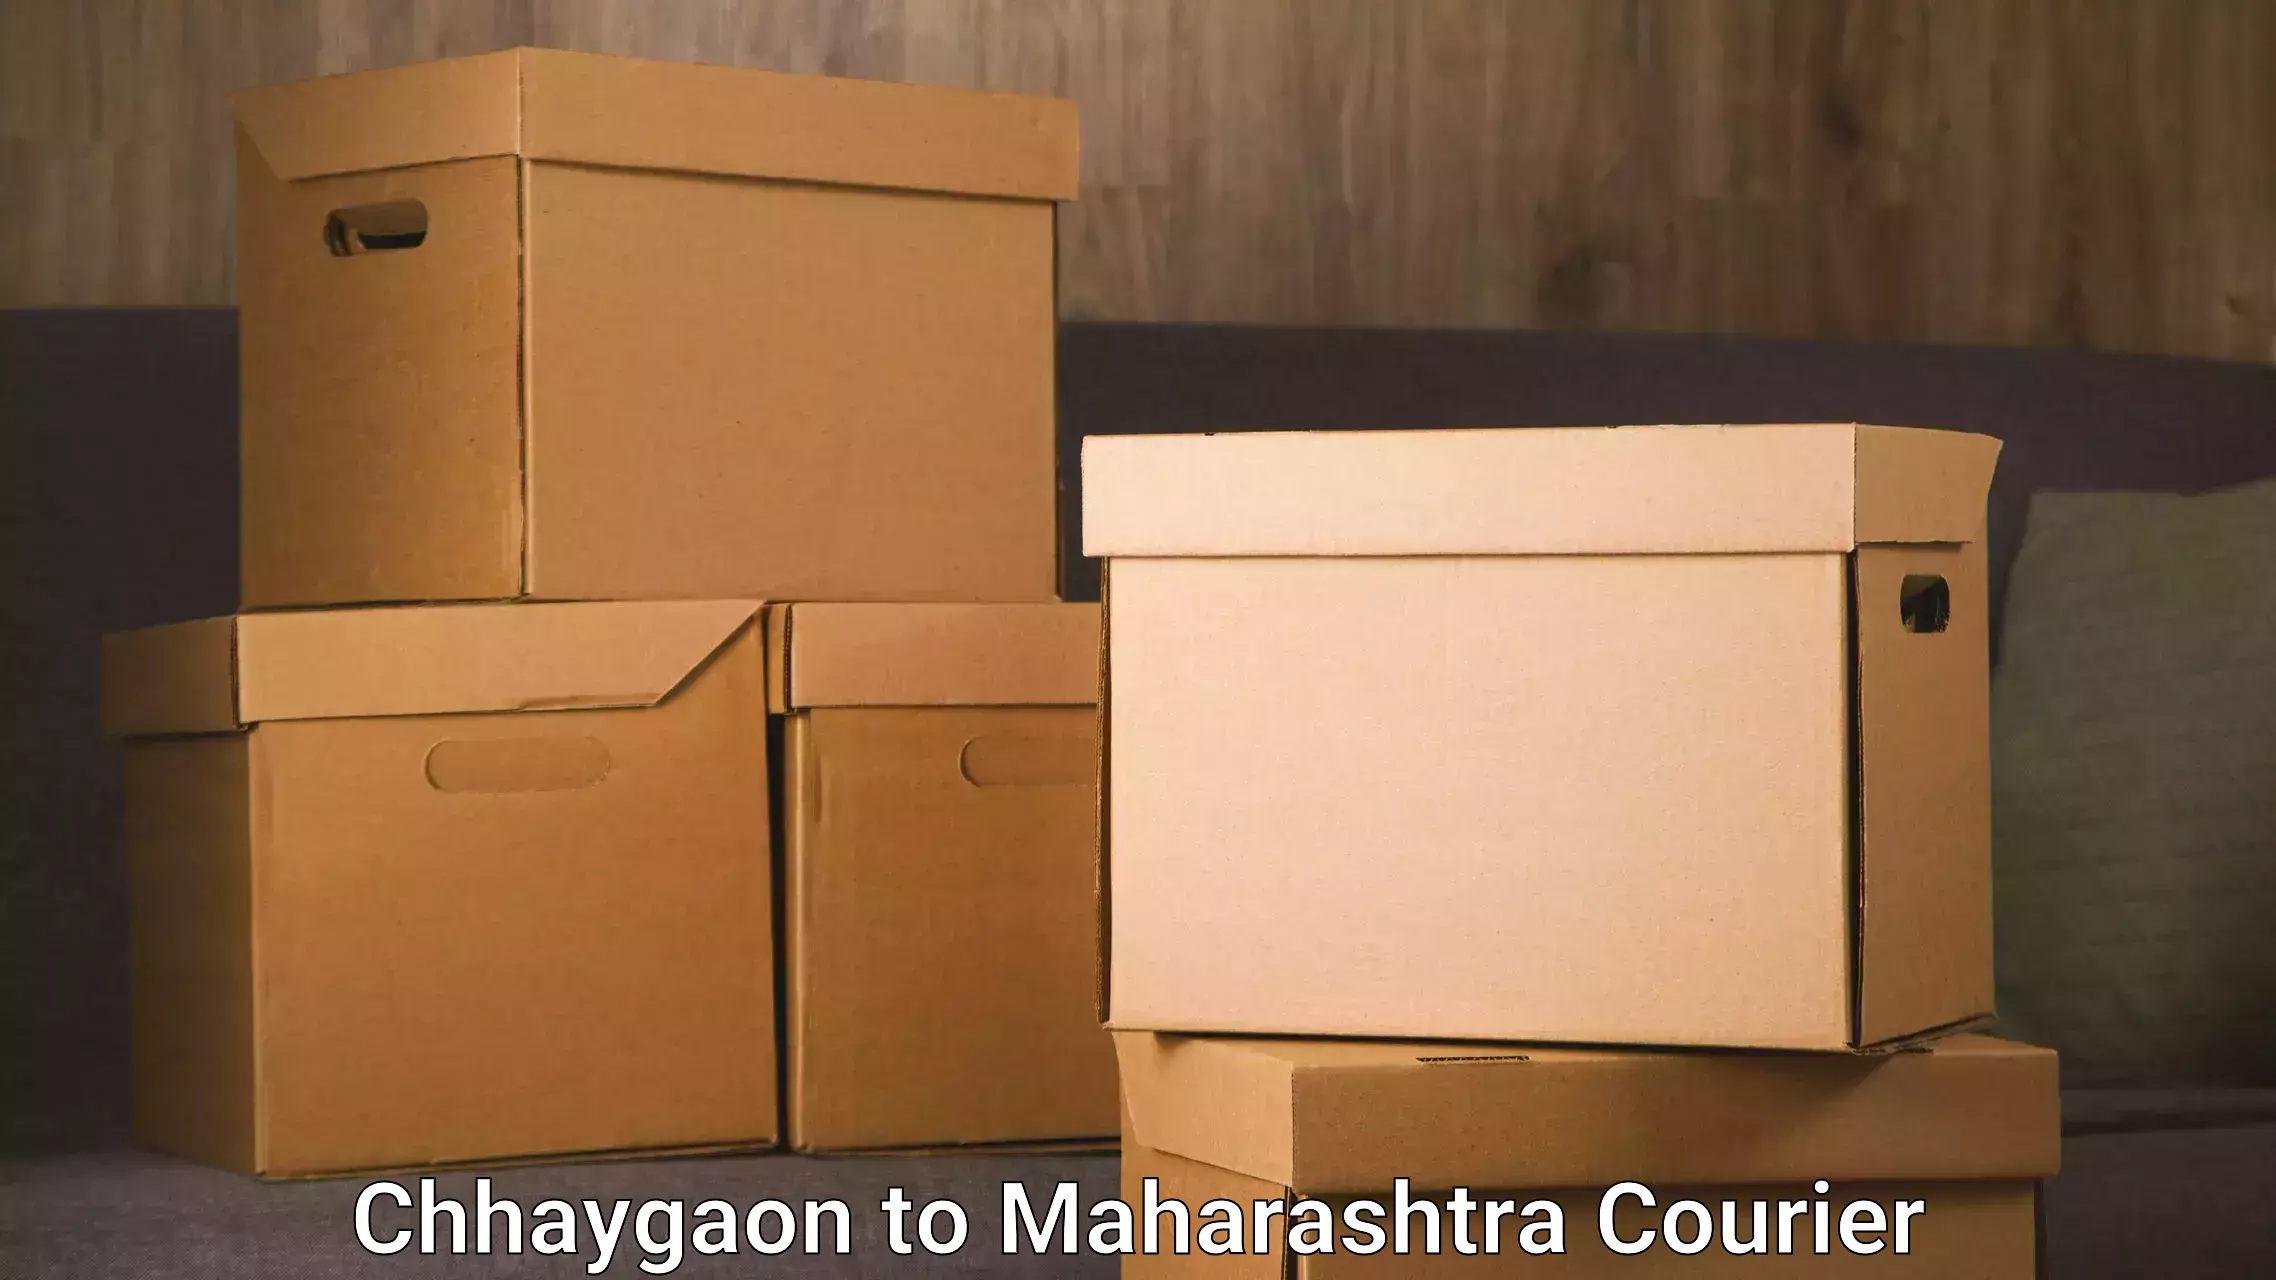 Parcel service for businesses Chhaygaon to Jalna